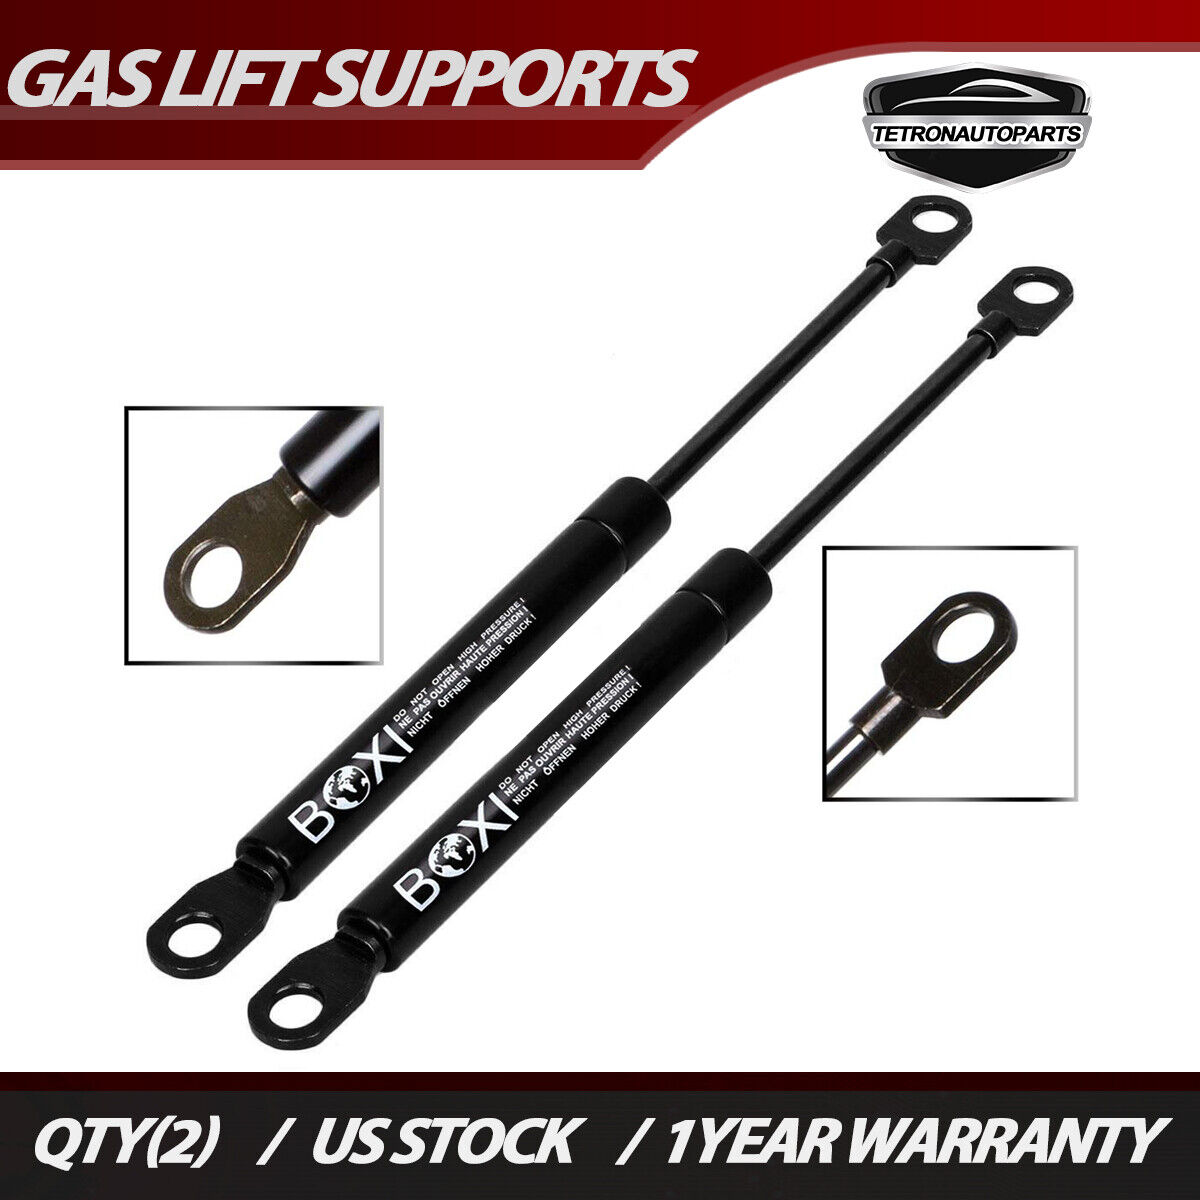 Qty2 10 inch 60 lbs Gas Prop Lift Supports Fits SPA Cover  ToolBox Lid Bed Truck